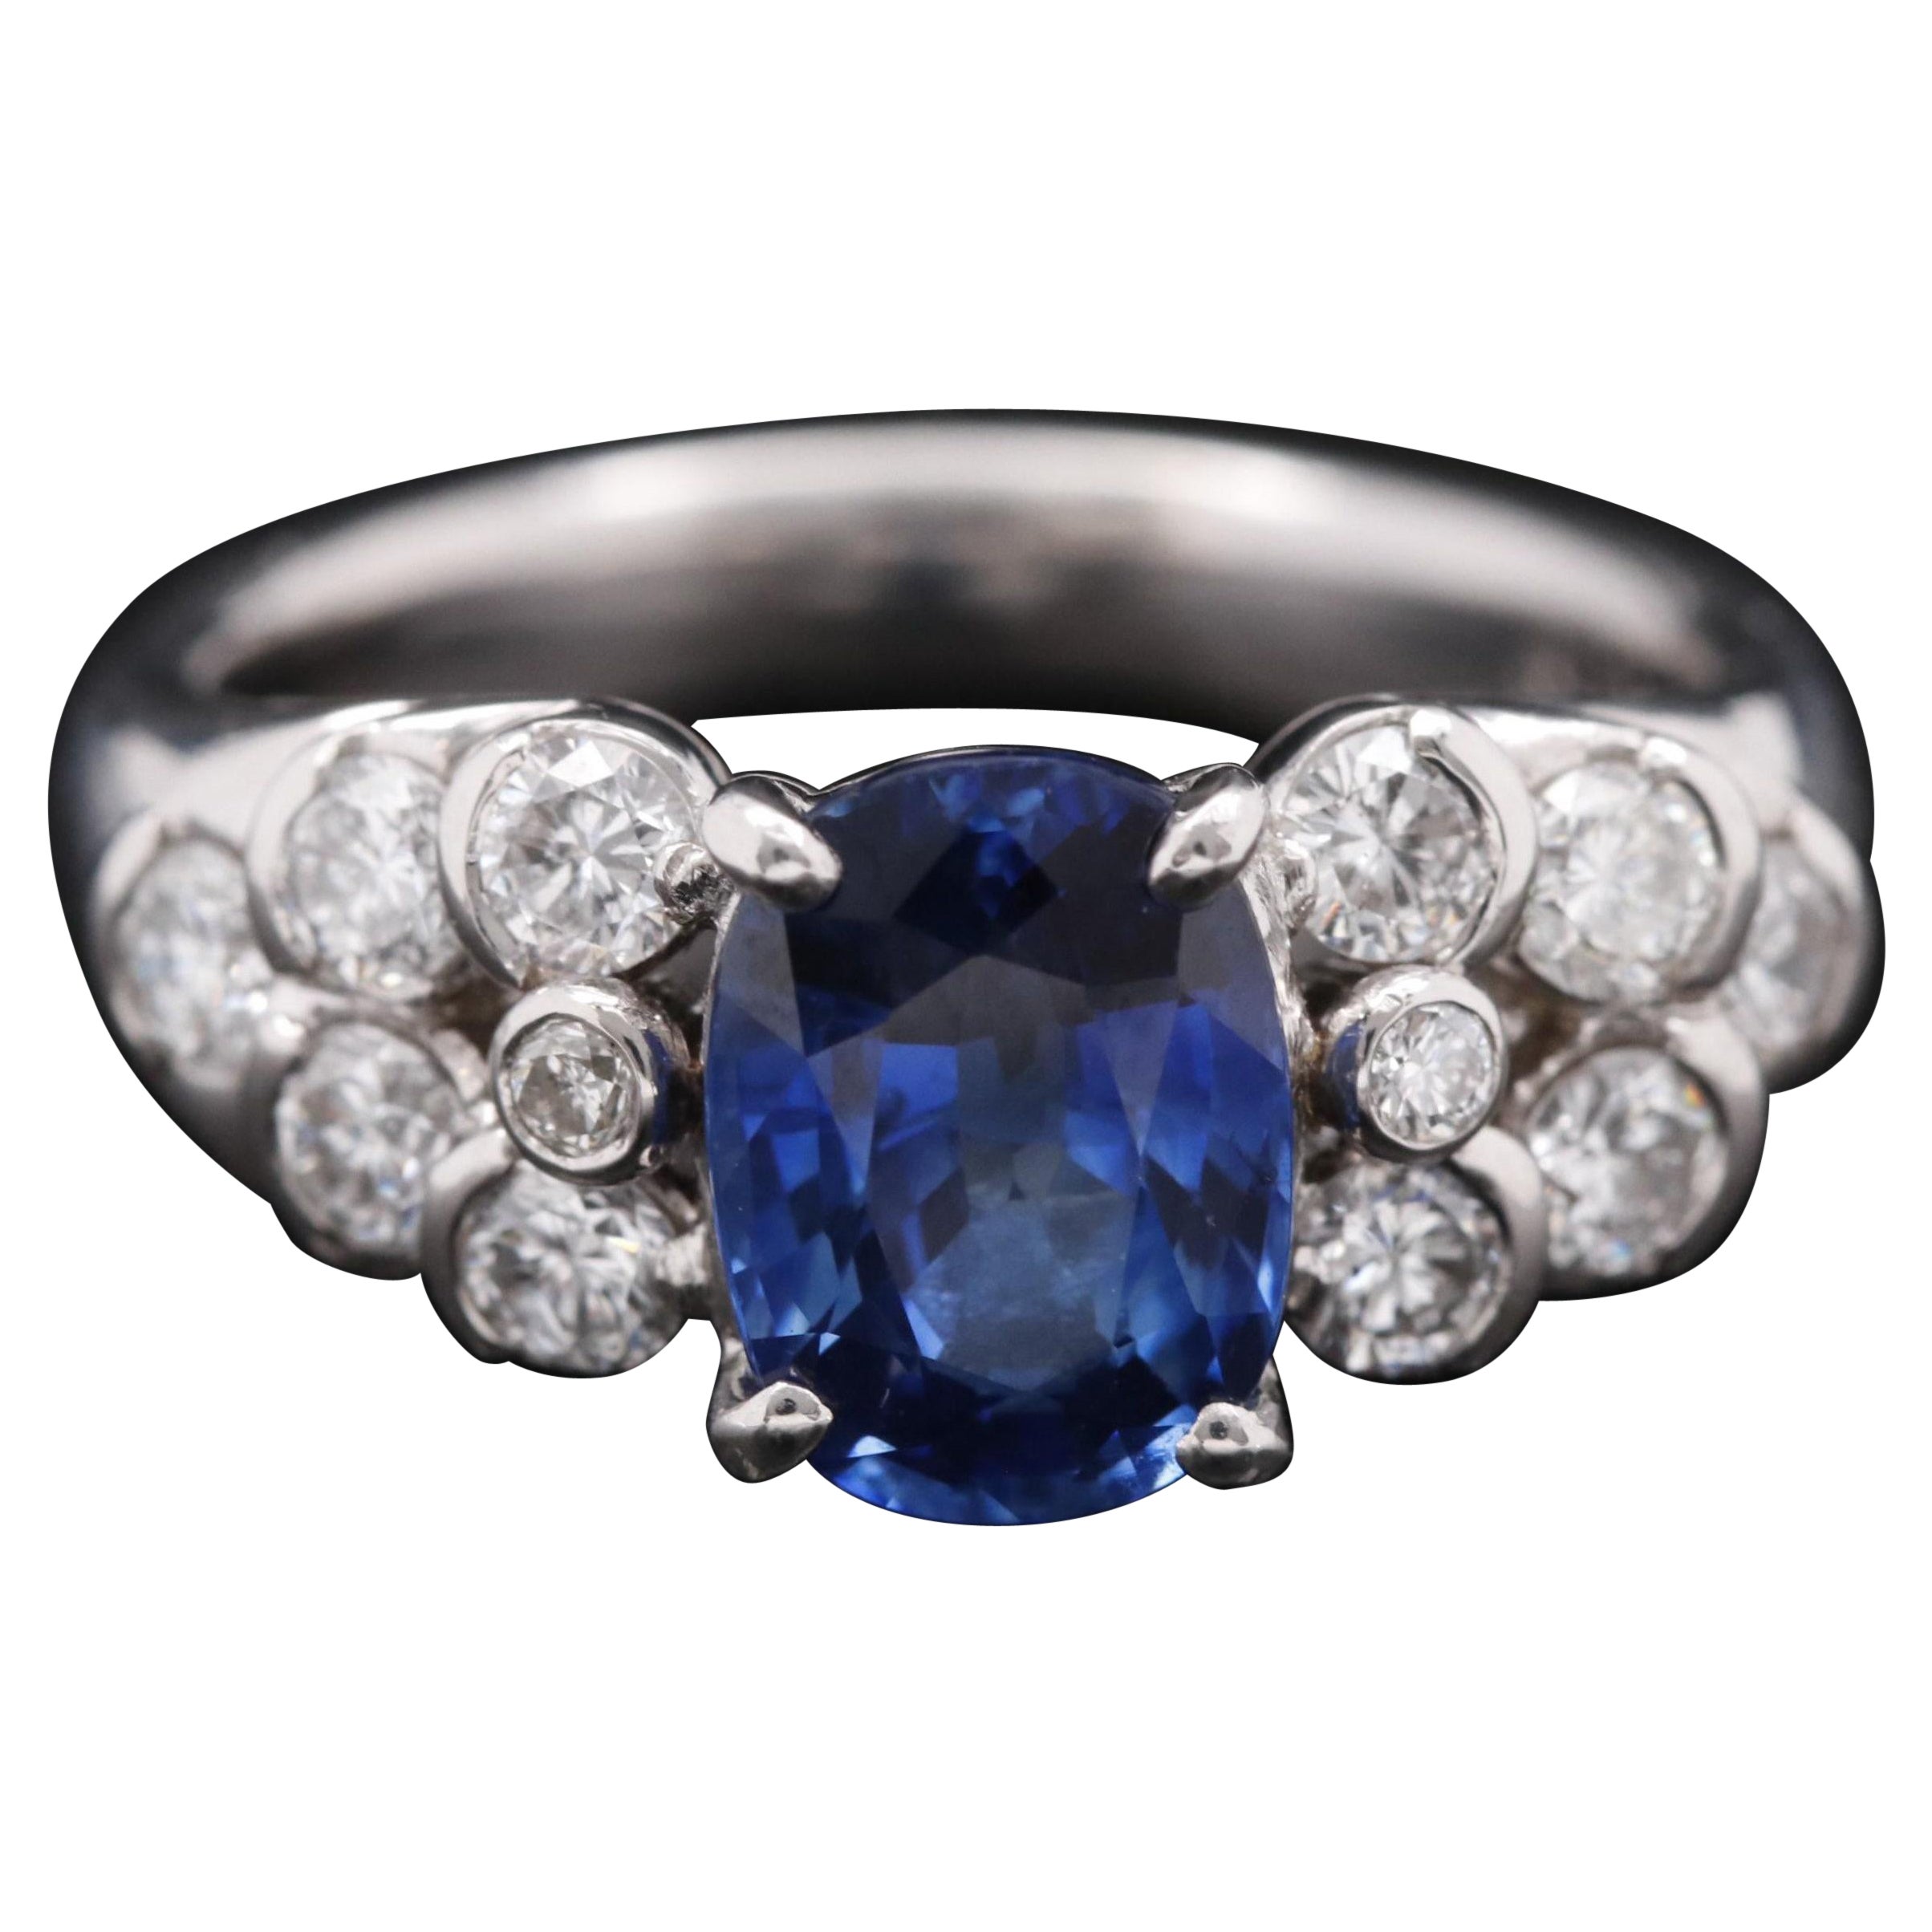 For Sale:  2.67 Carat Sapphire and Diamond White Gold Engagement Ring Bridal Statement Ring